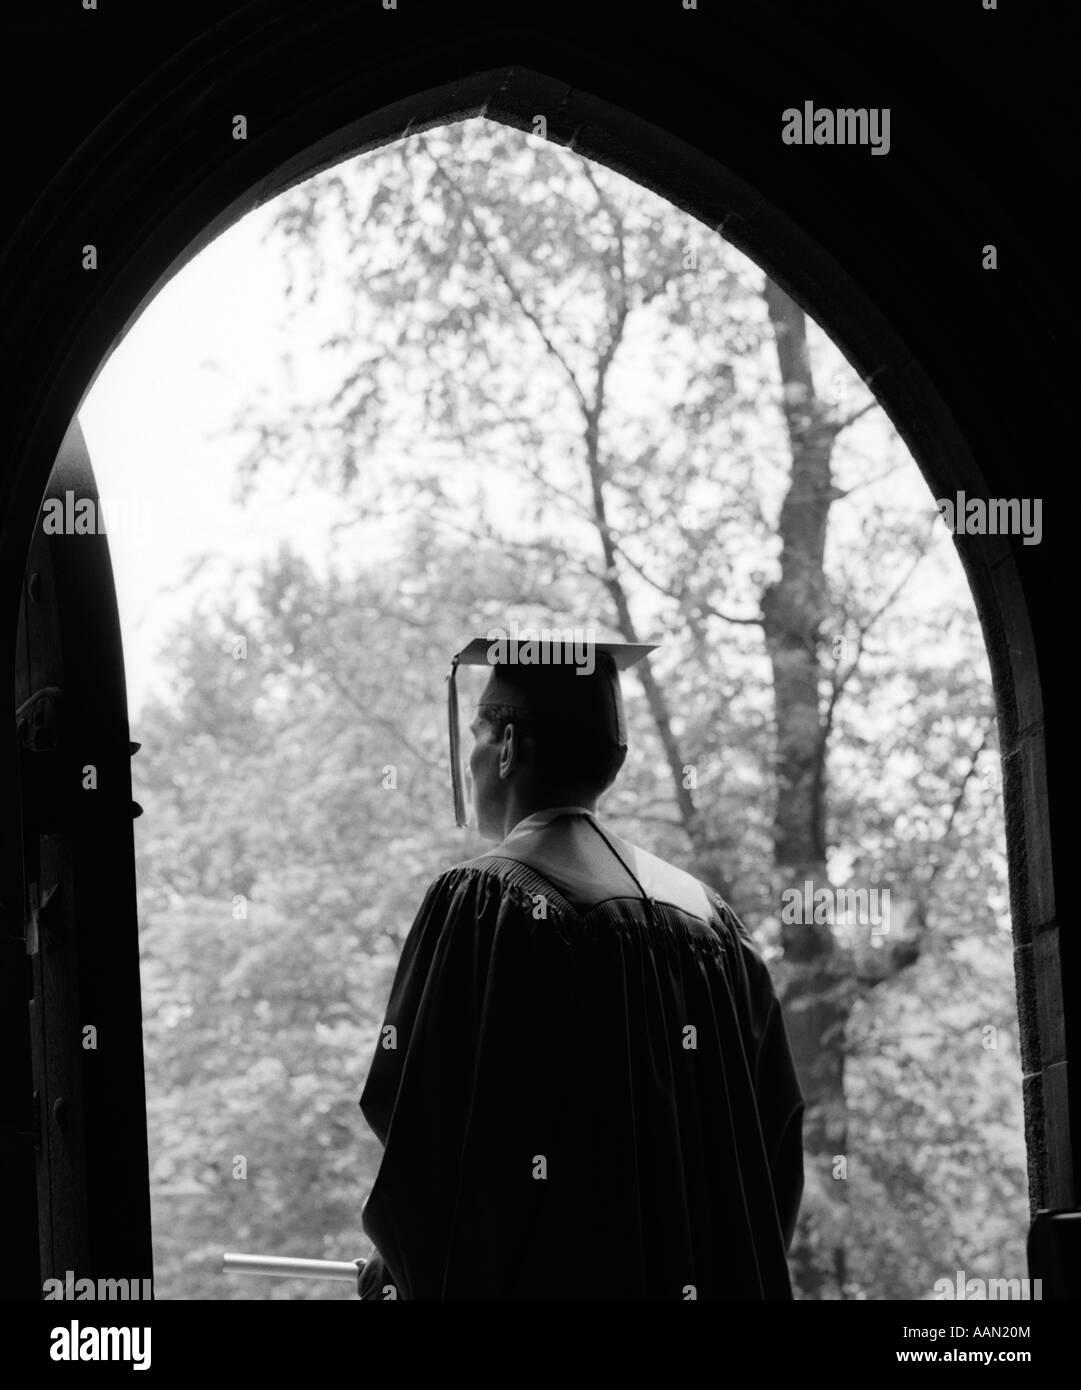 1960s BACK VIEW OF GRADUATE STANDING IN DARK ARCHED DOORWAY WITH TREES IN SUNLIT BACKGROUND Stock Photo